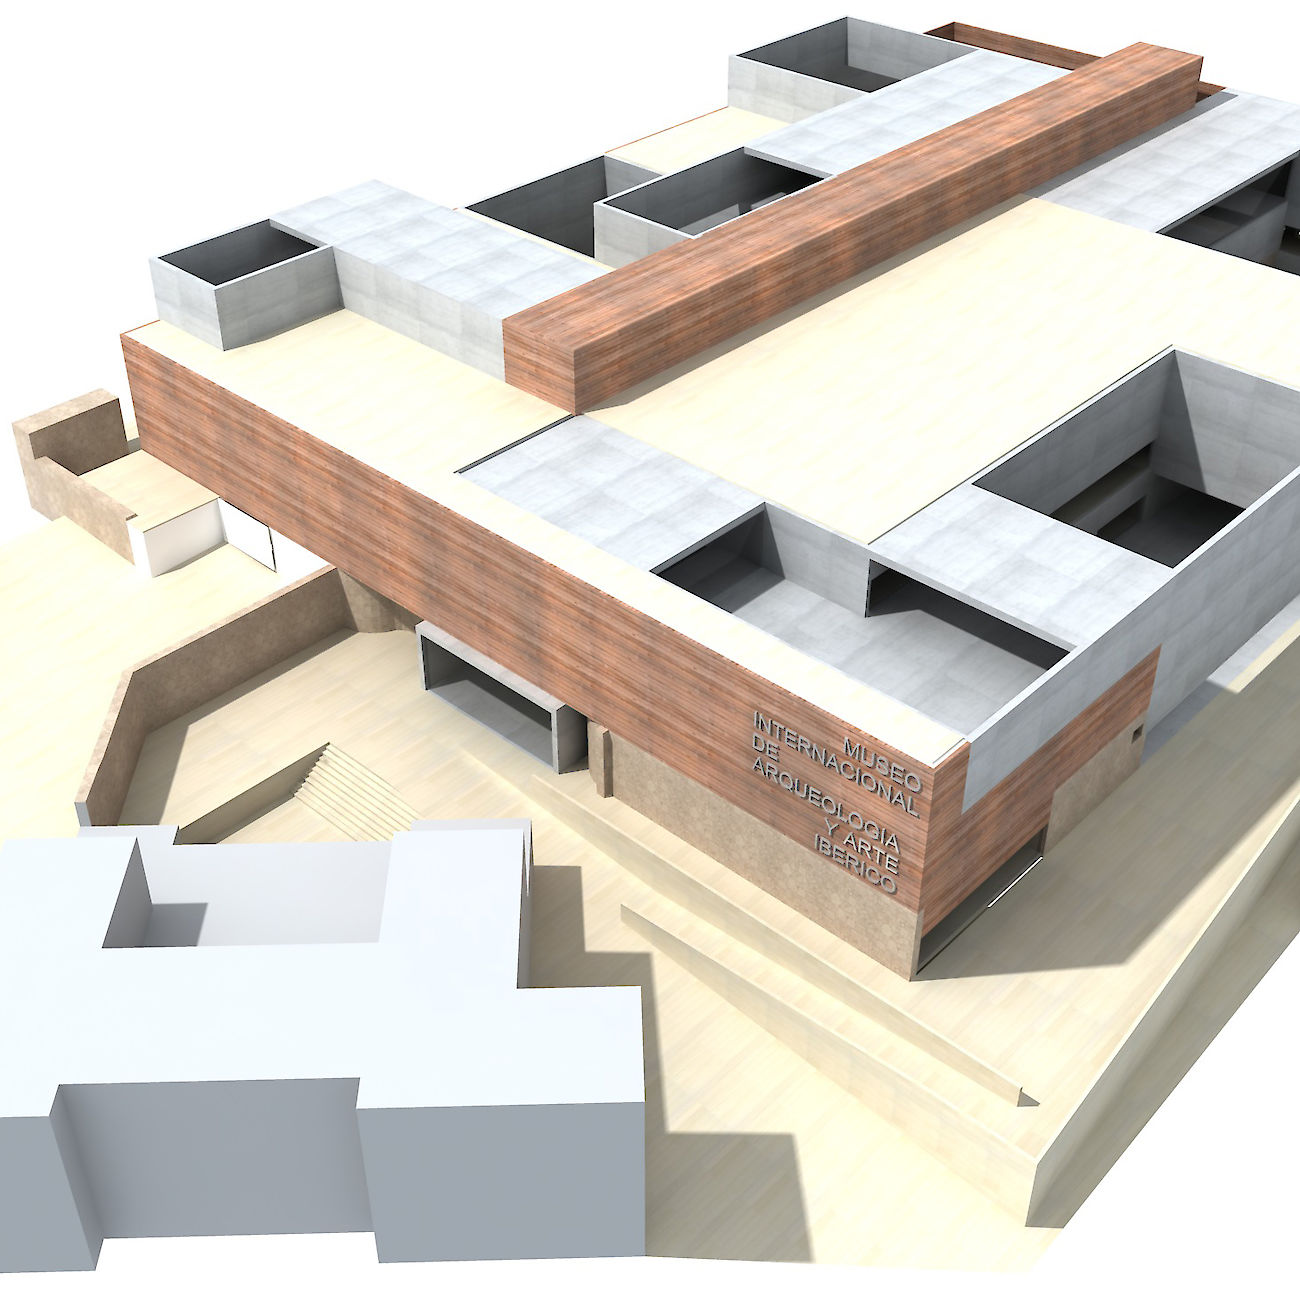 archaeological museum of Jaen - competition